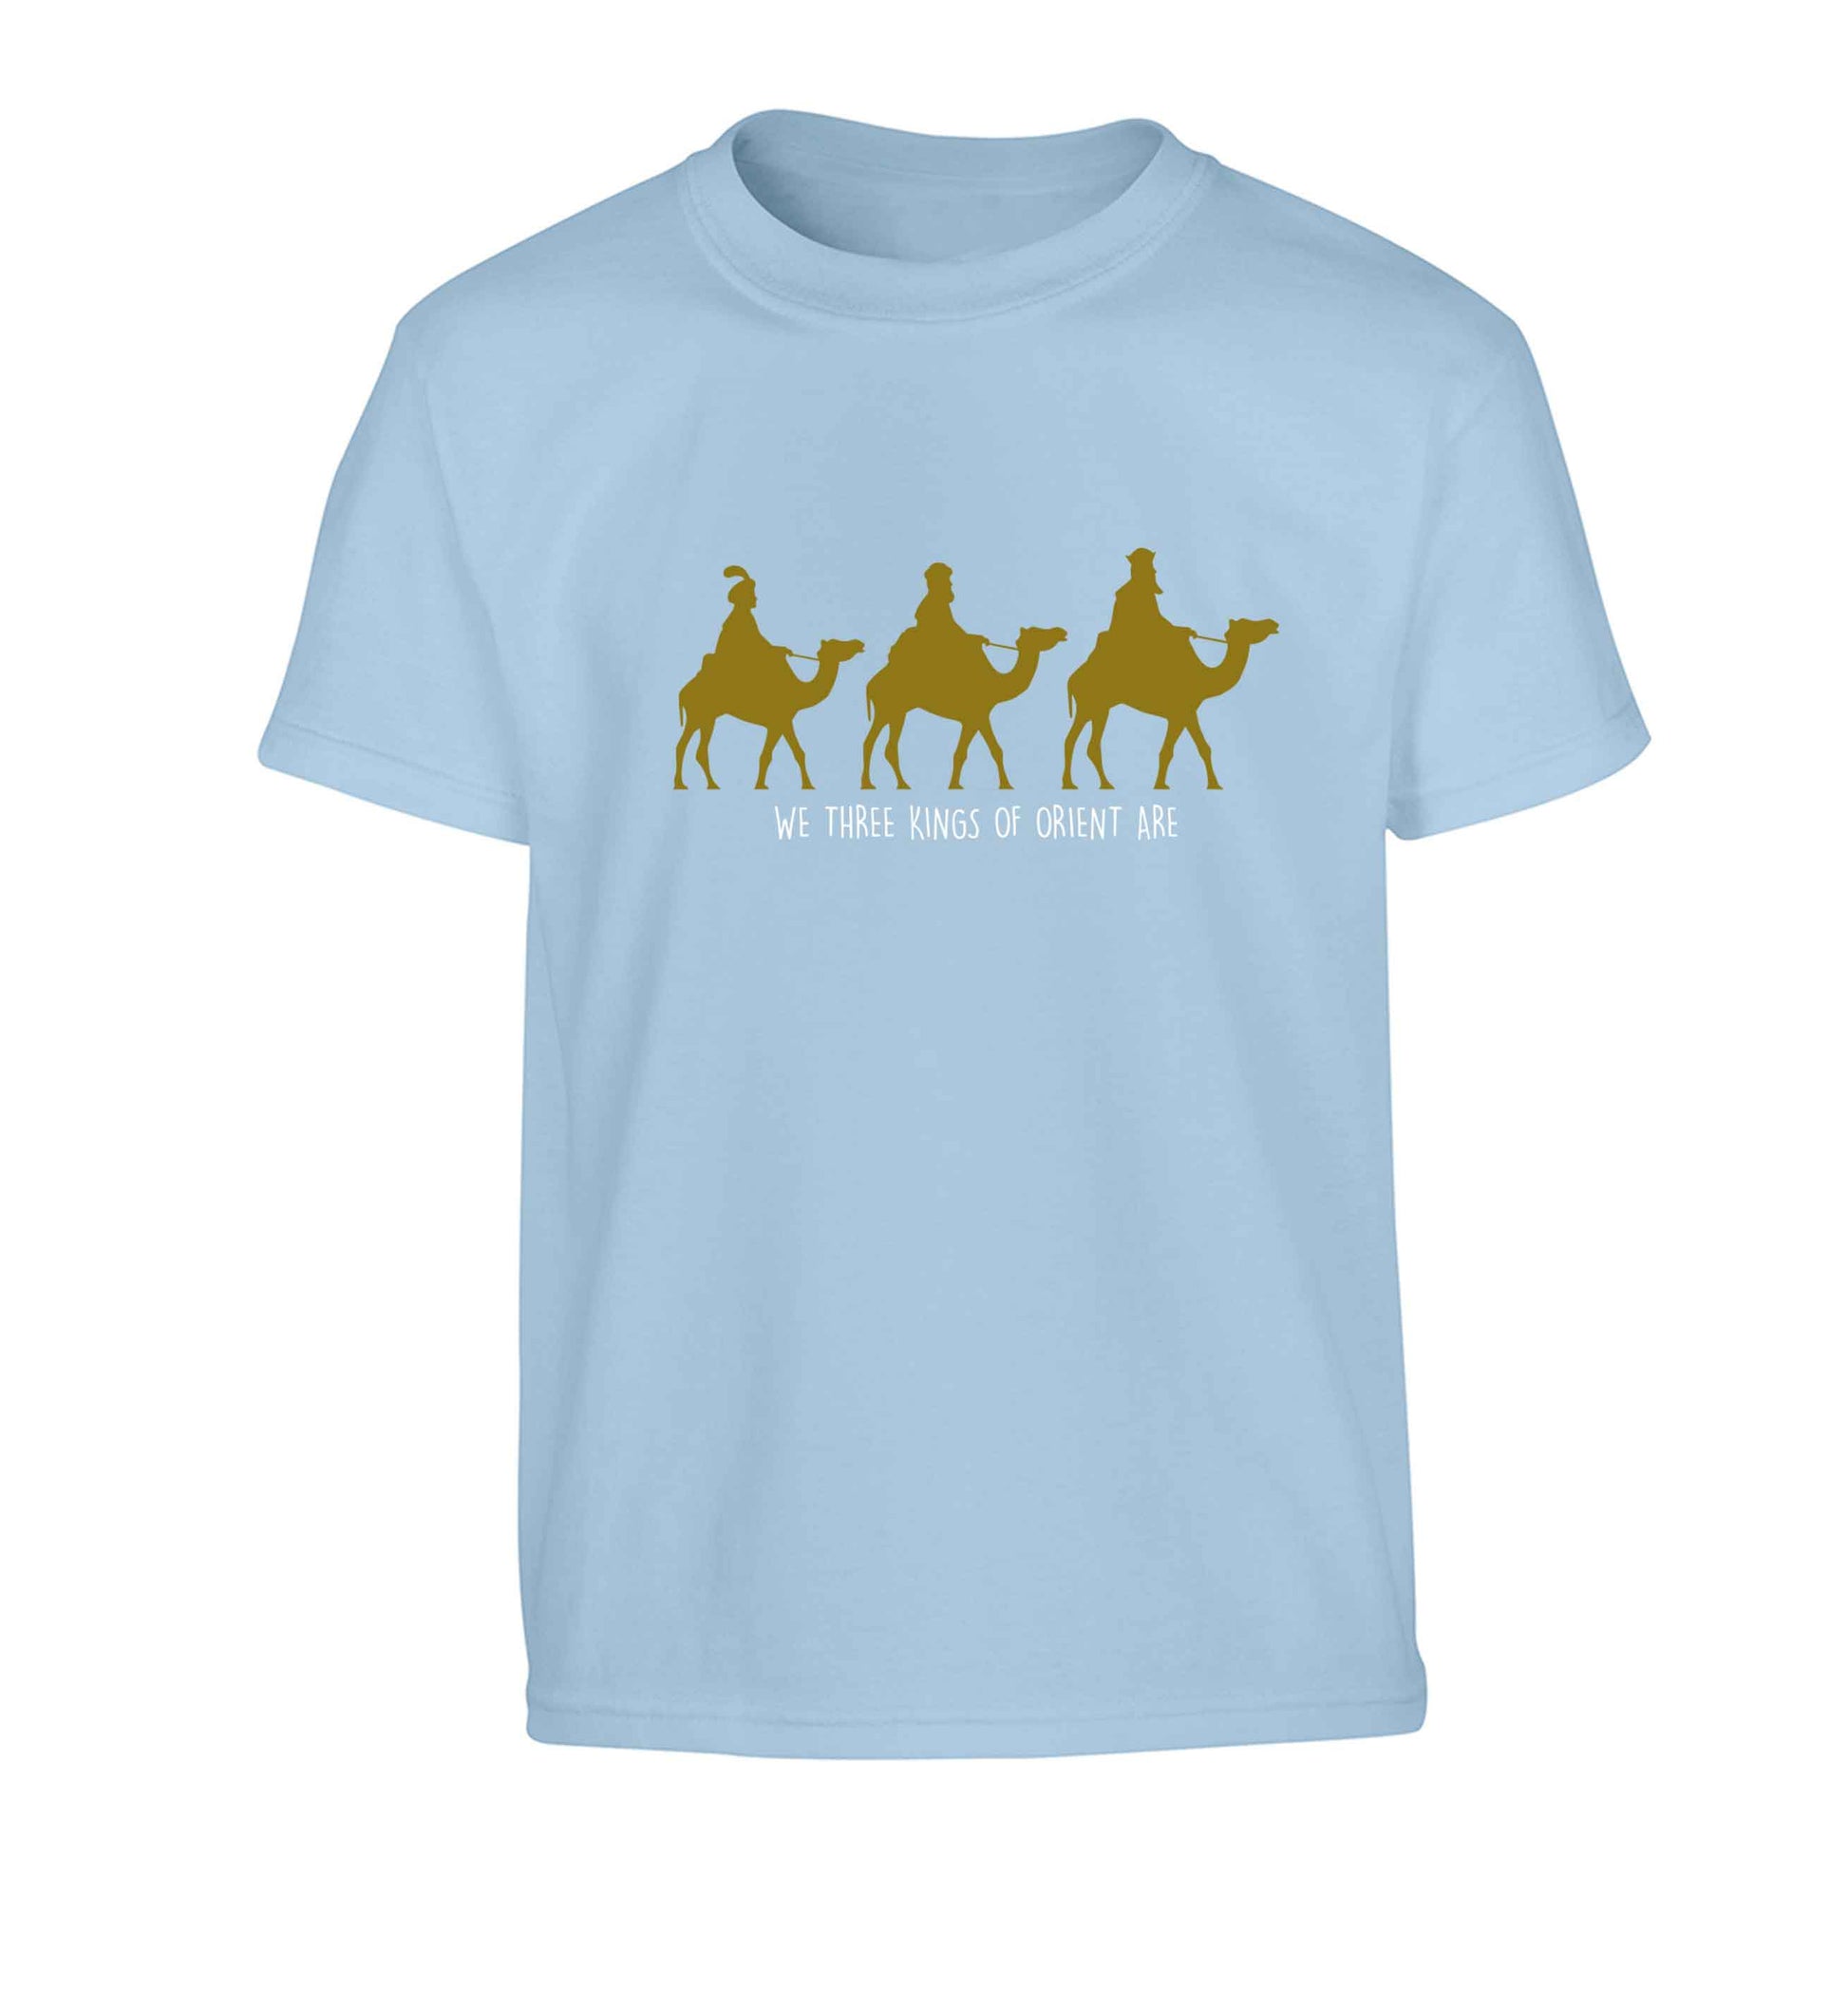 We three kings of orient are Children's light blue Tshirt 12-13 Years